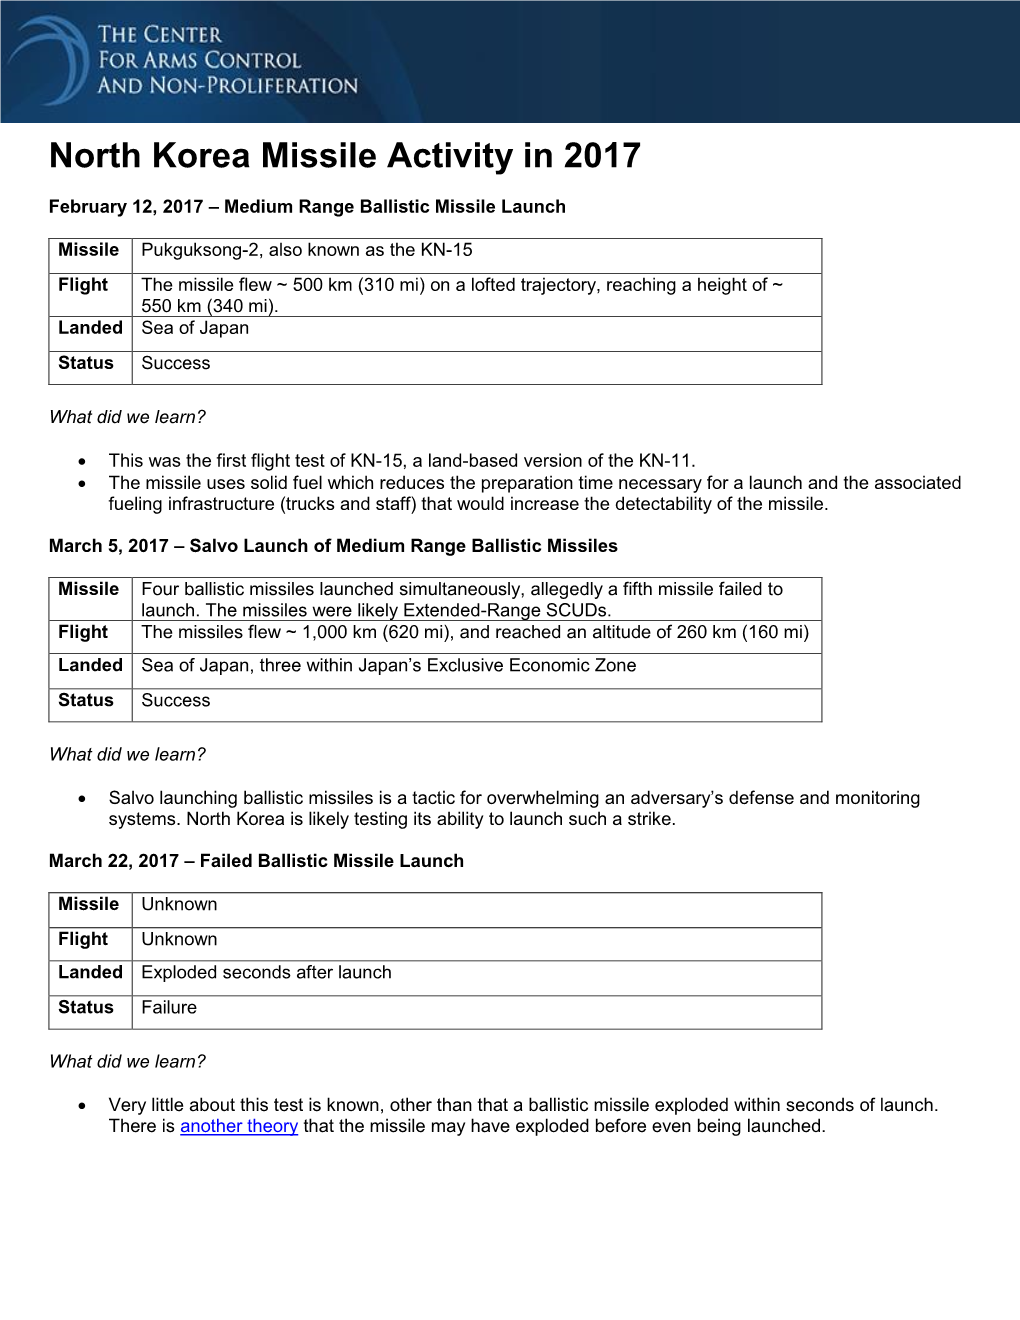 North Korea Missile Activity in 2017